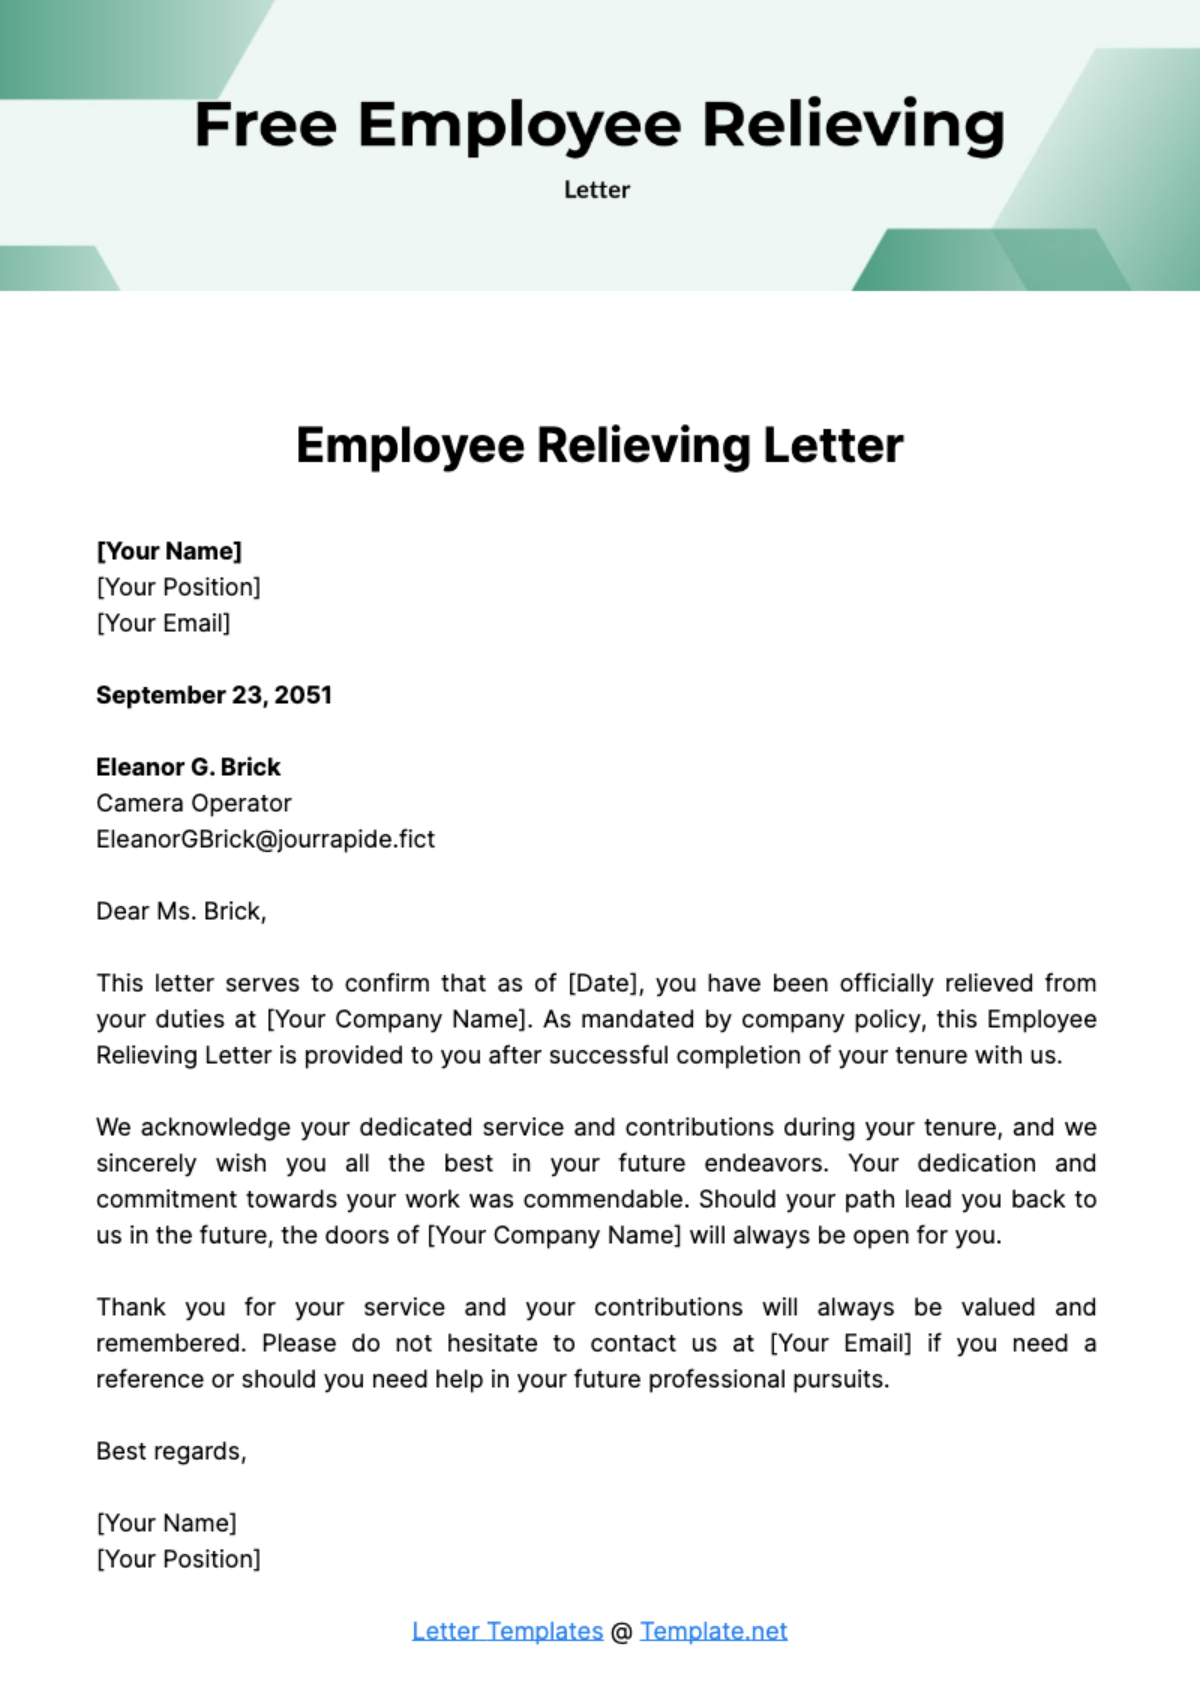 Free Employee Relieving Letter Template